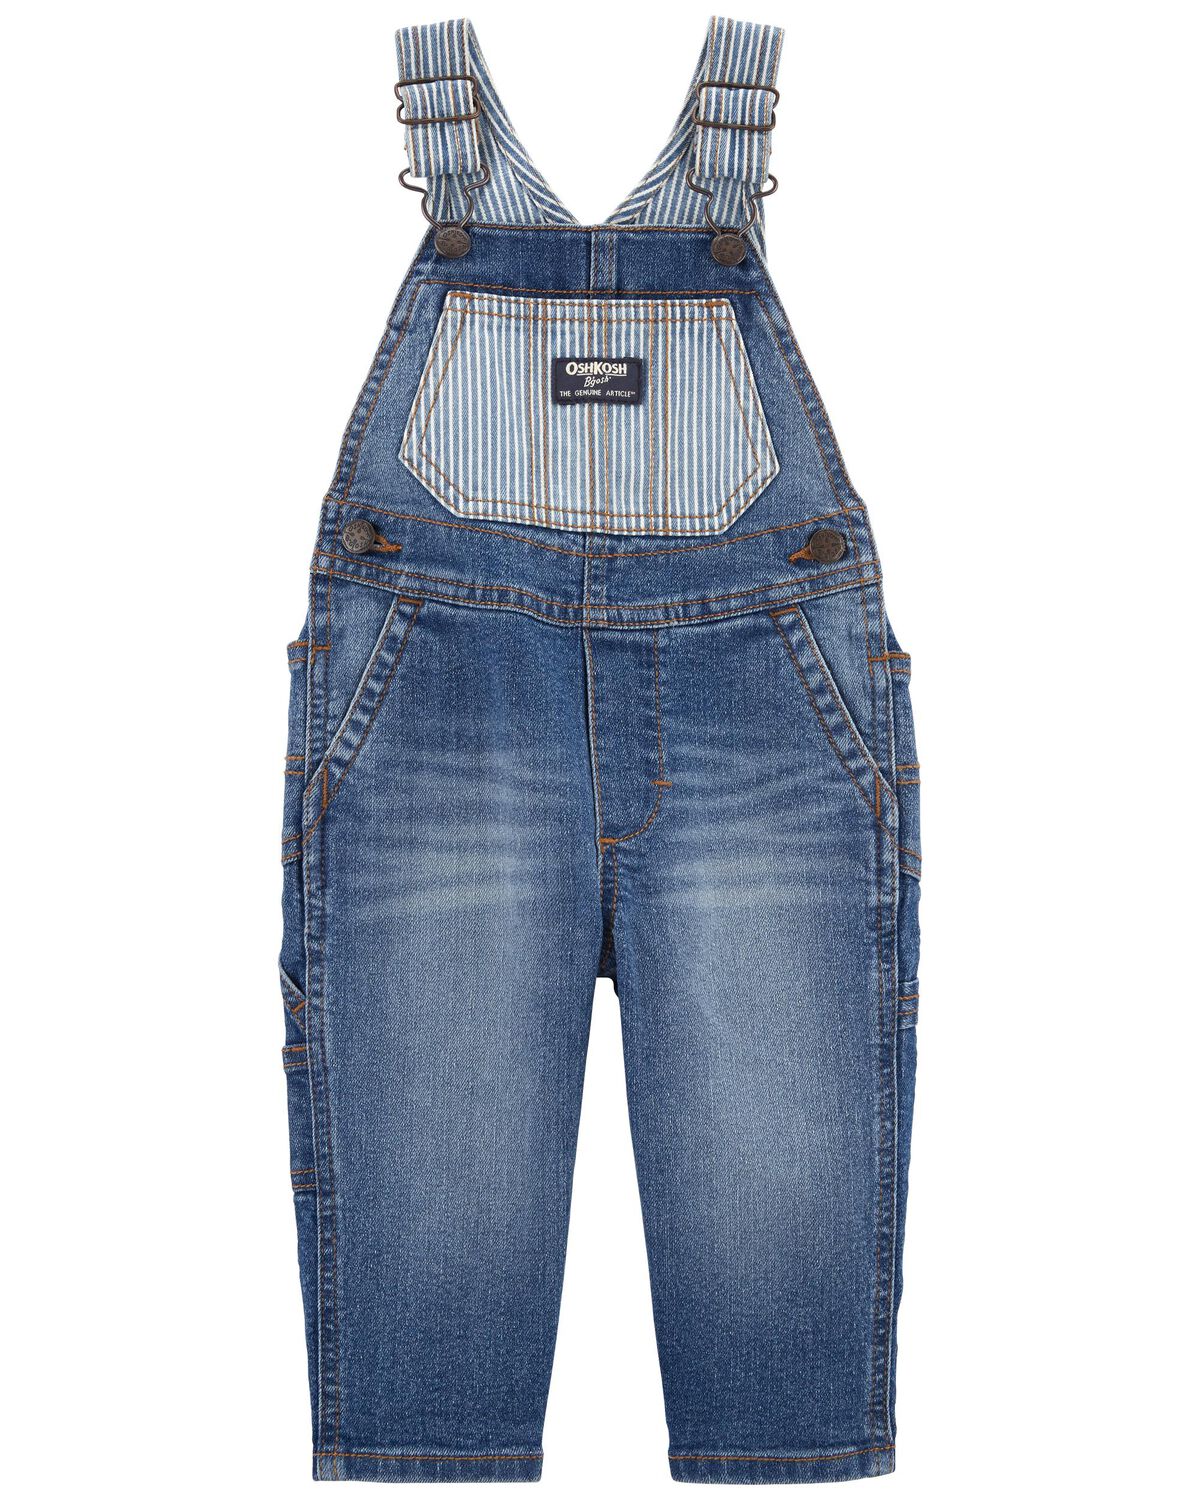 Baby Favorite Overalls: Hickory Stripe Remix